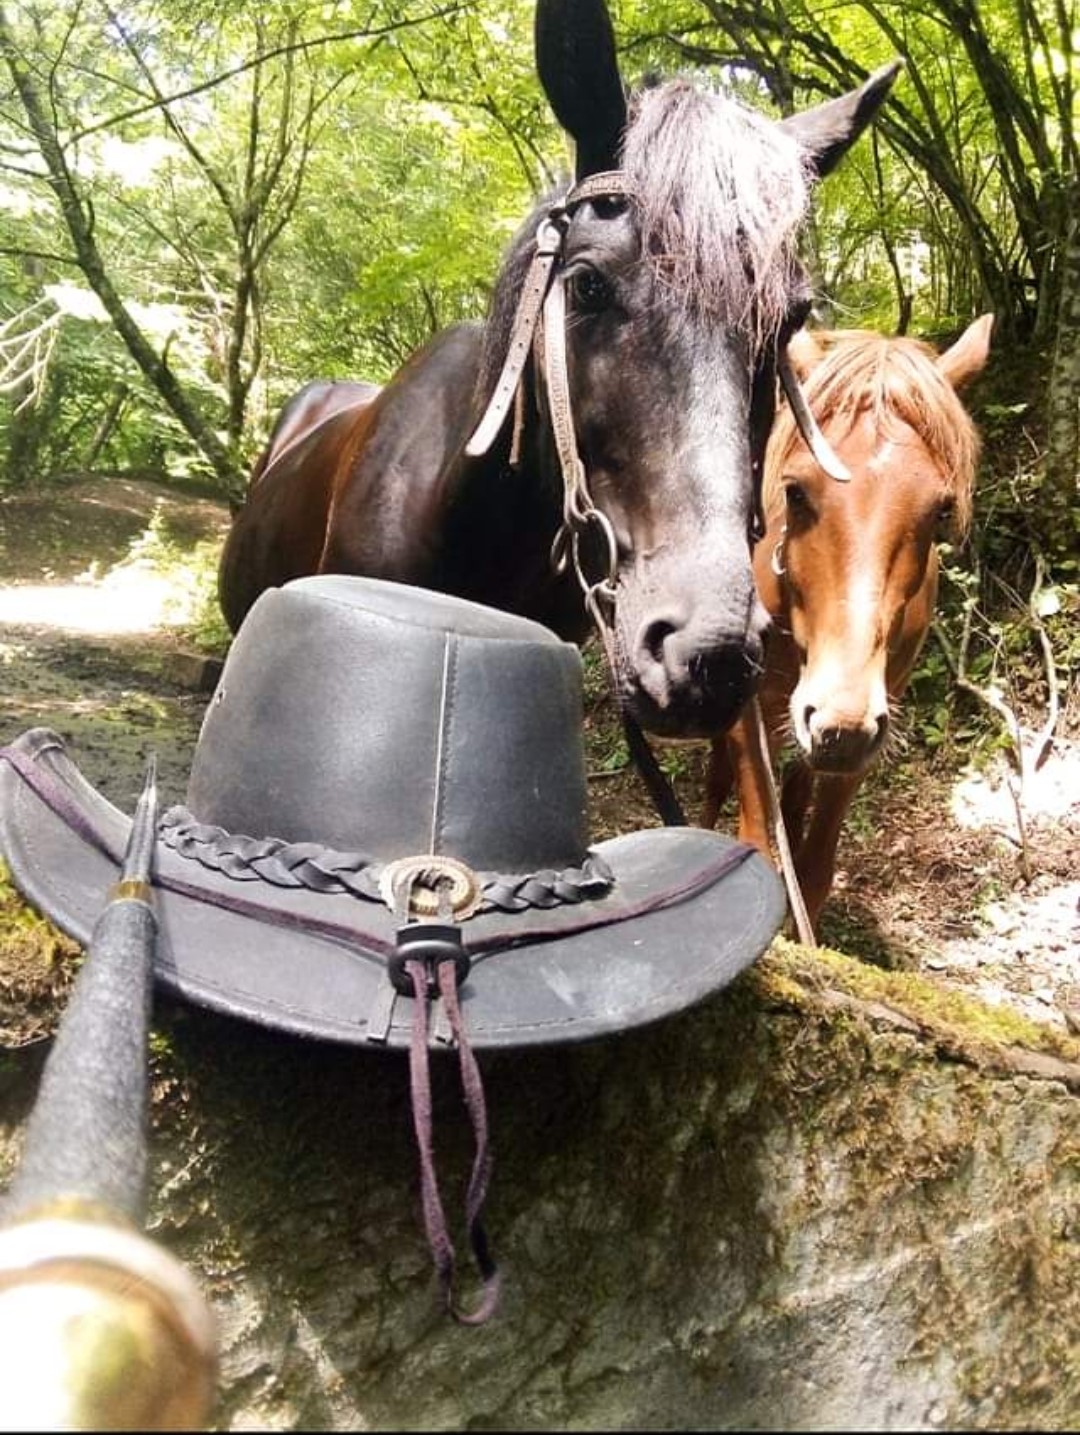 Riding in nature